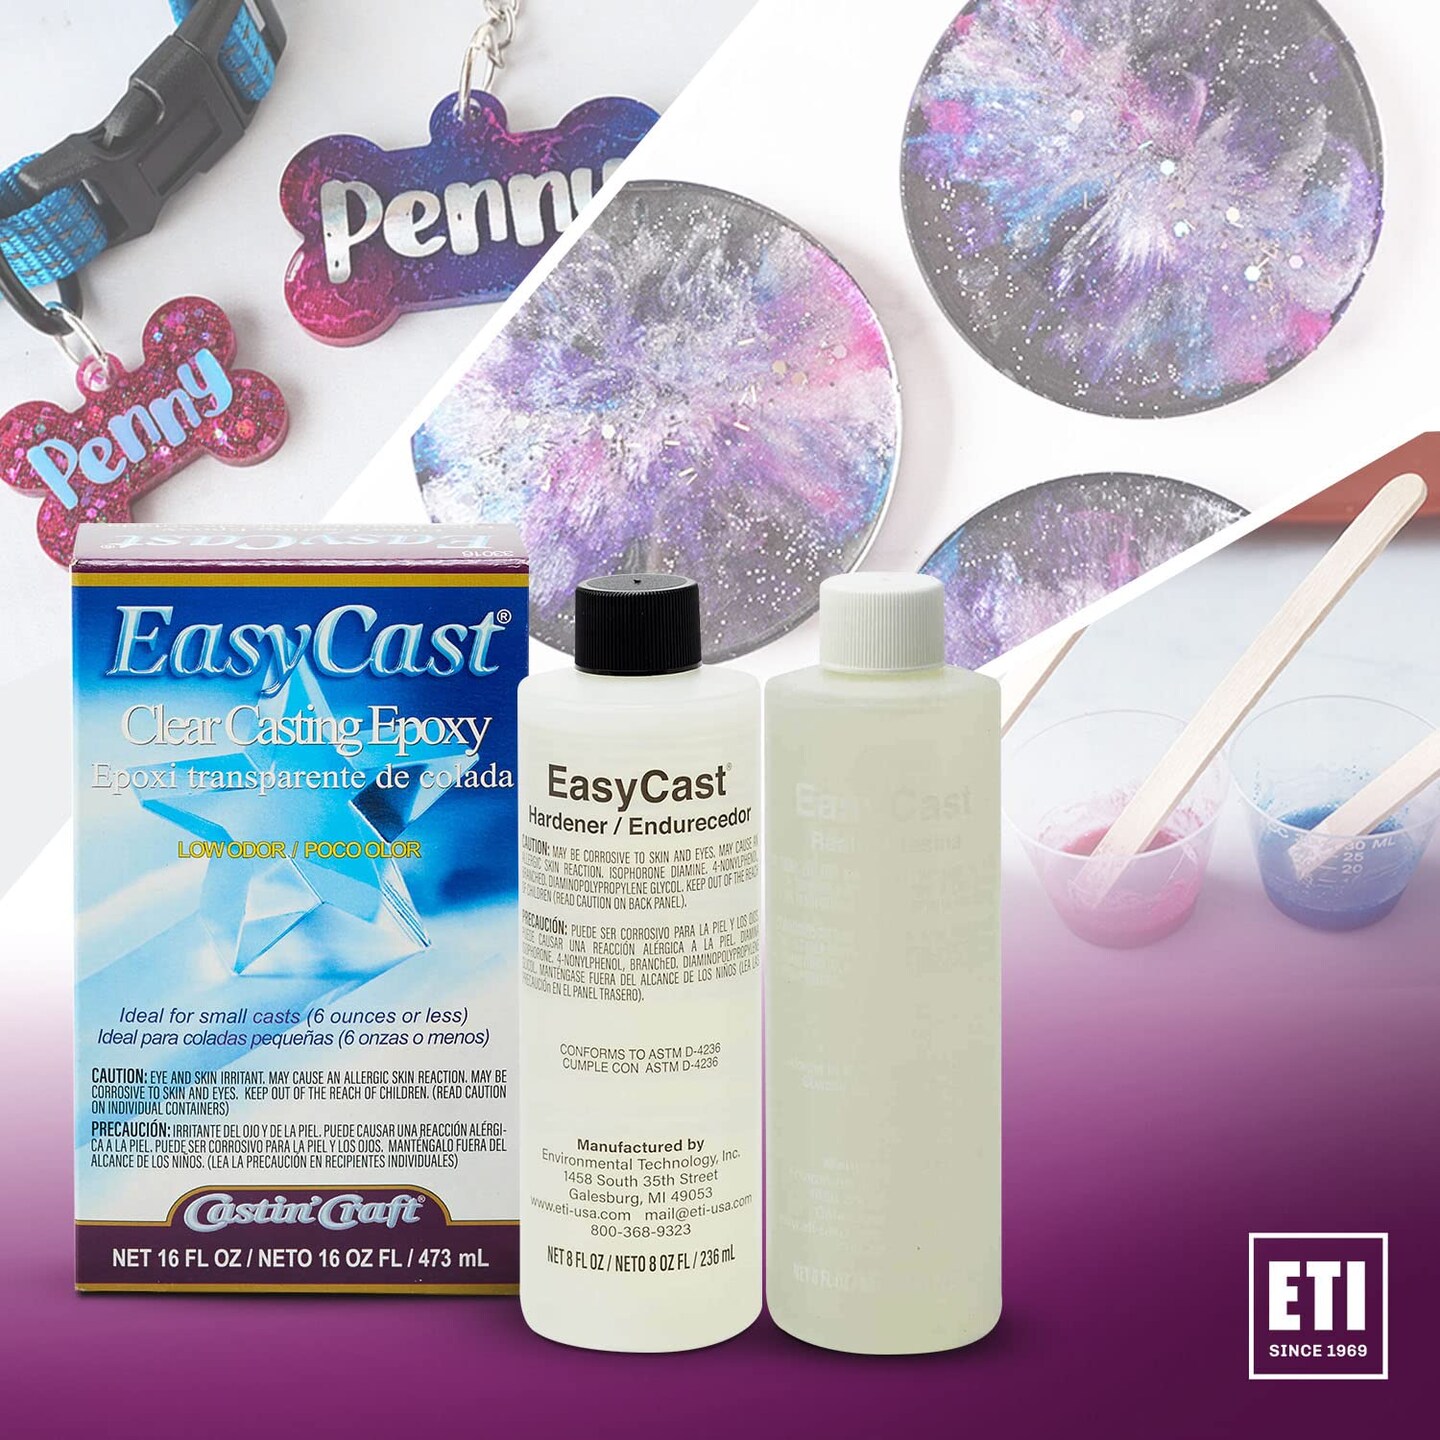 Environmental Technology EasyCast Crystal Clear Casting Epoxy Mix (2-Part Kit) For Coating of Small Arts &#x26; Crafts, Wood, Jewelry Making | Low Odor &#x26; Solvent Free | 8 oz Resin + 8oz Hardener (16 ounce)